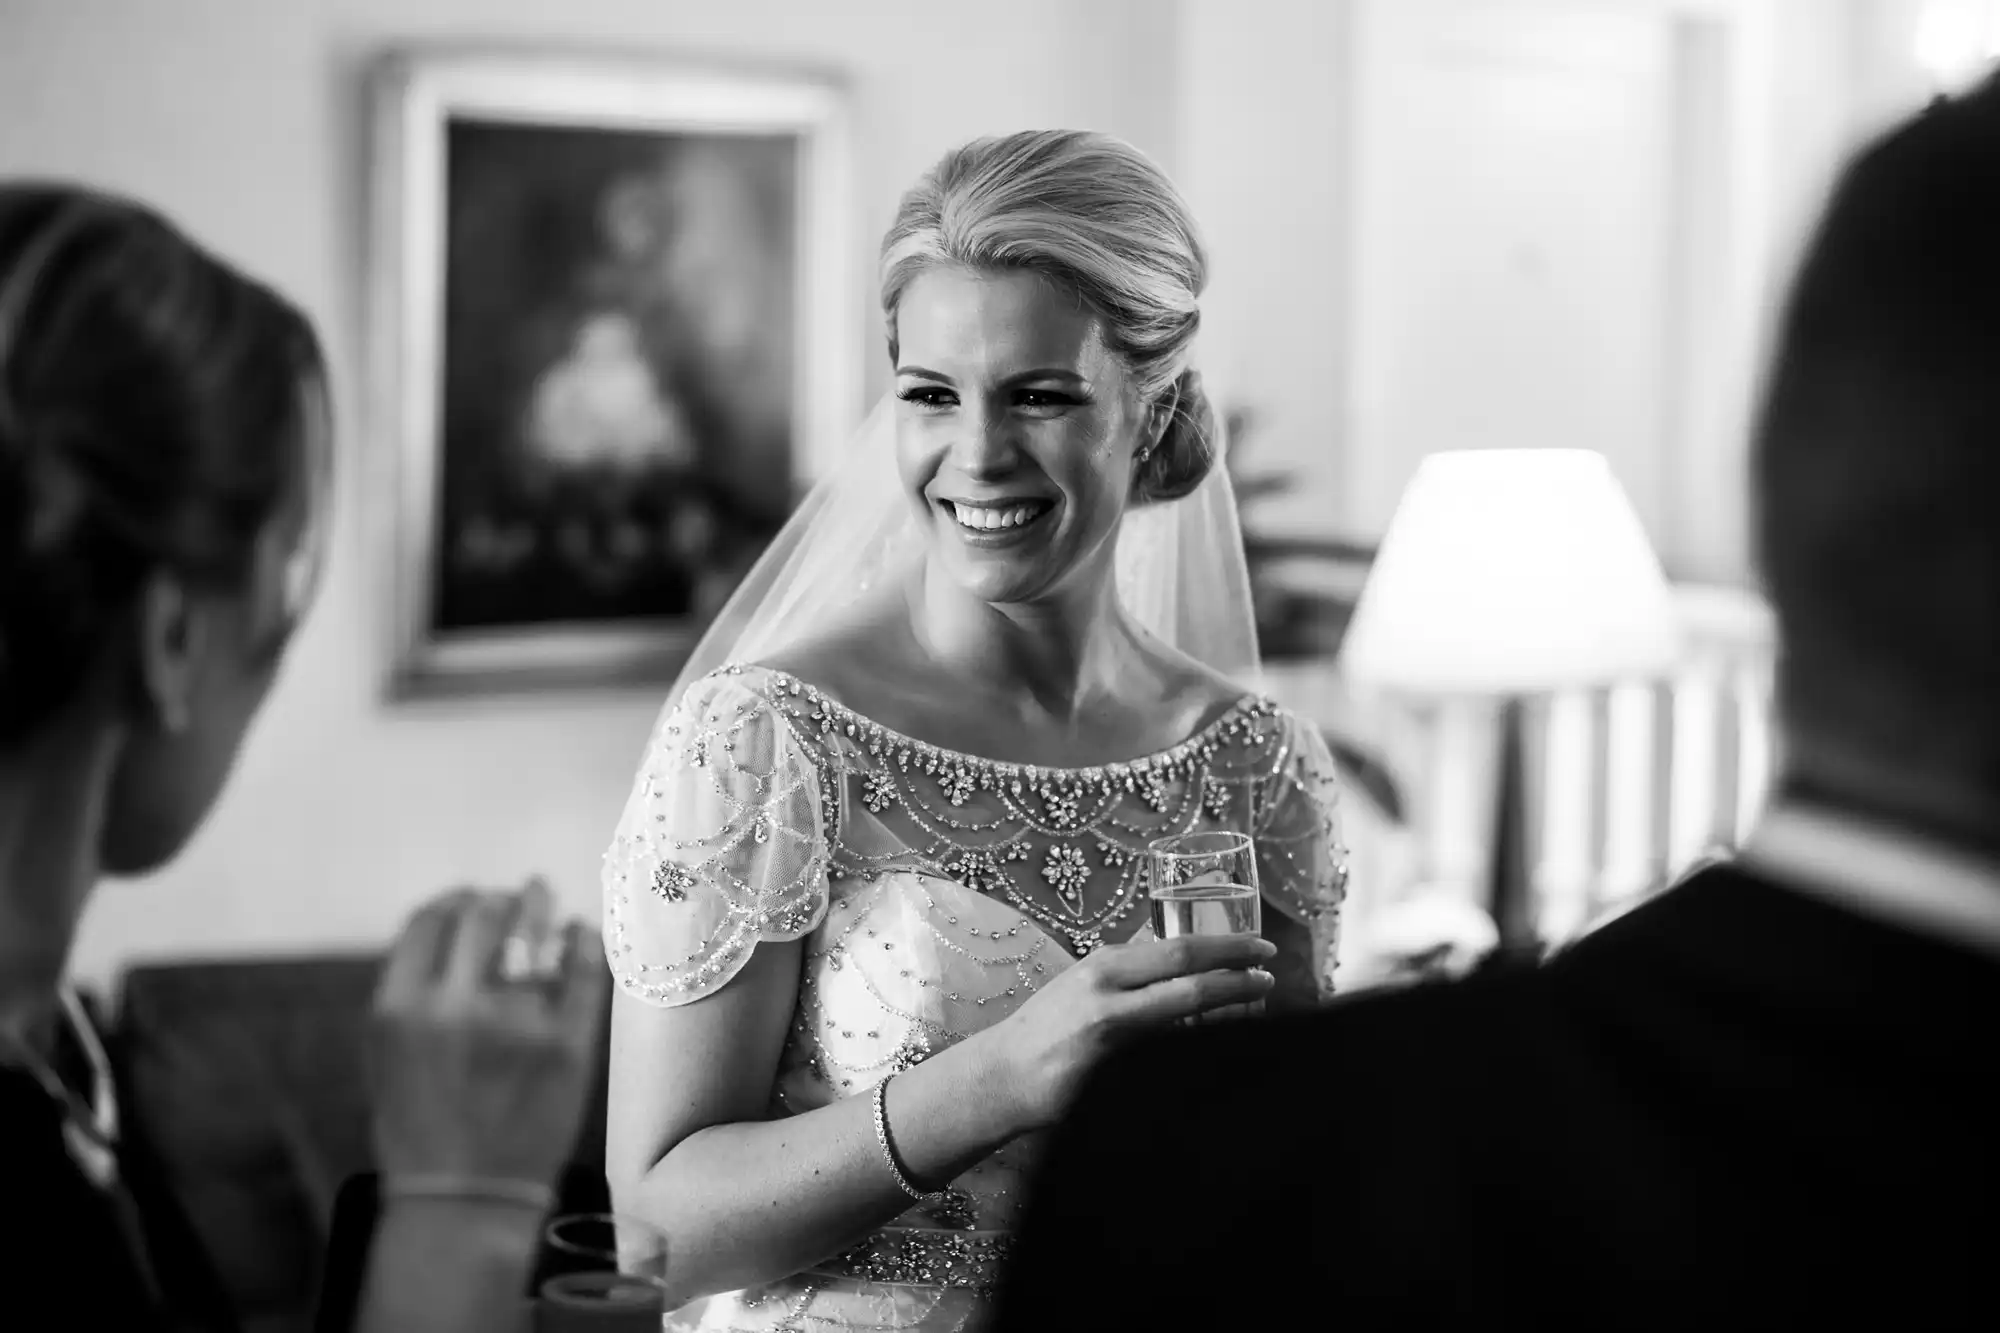 A smiling bride in a beaded dress holds a drink while conversing with guests in a well-lit room.